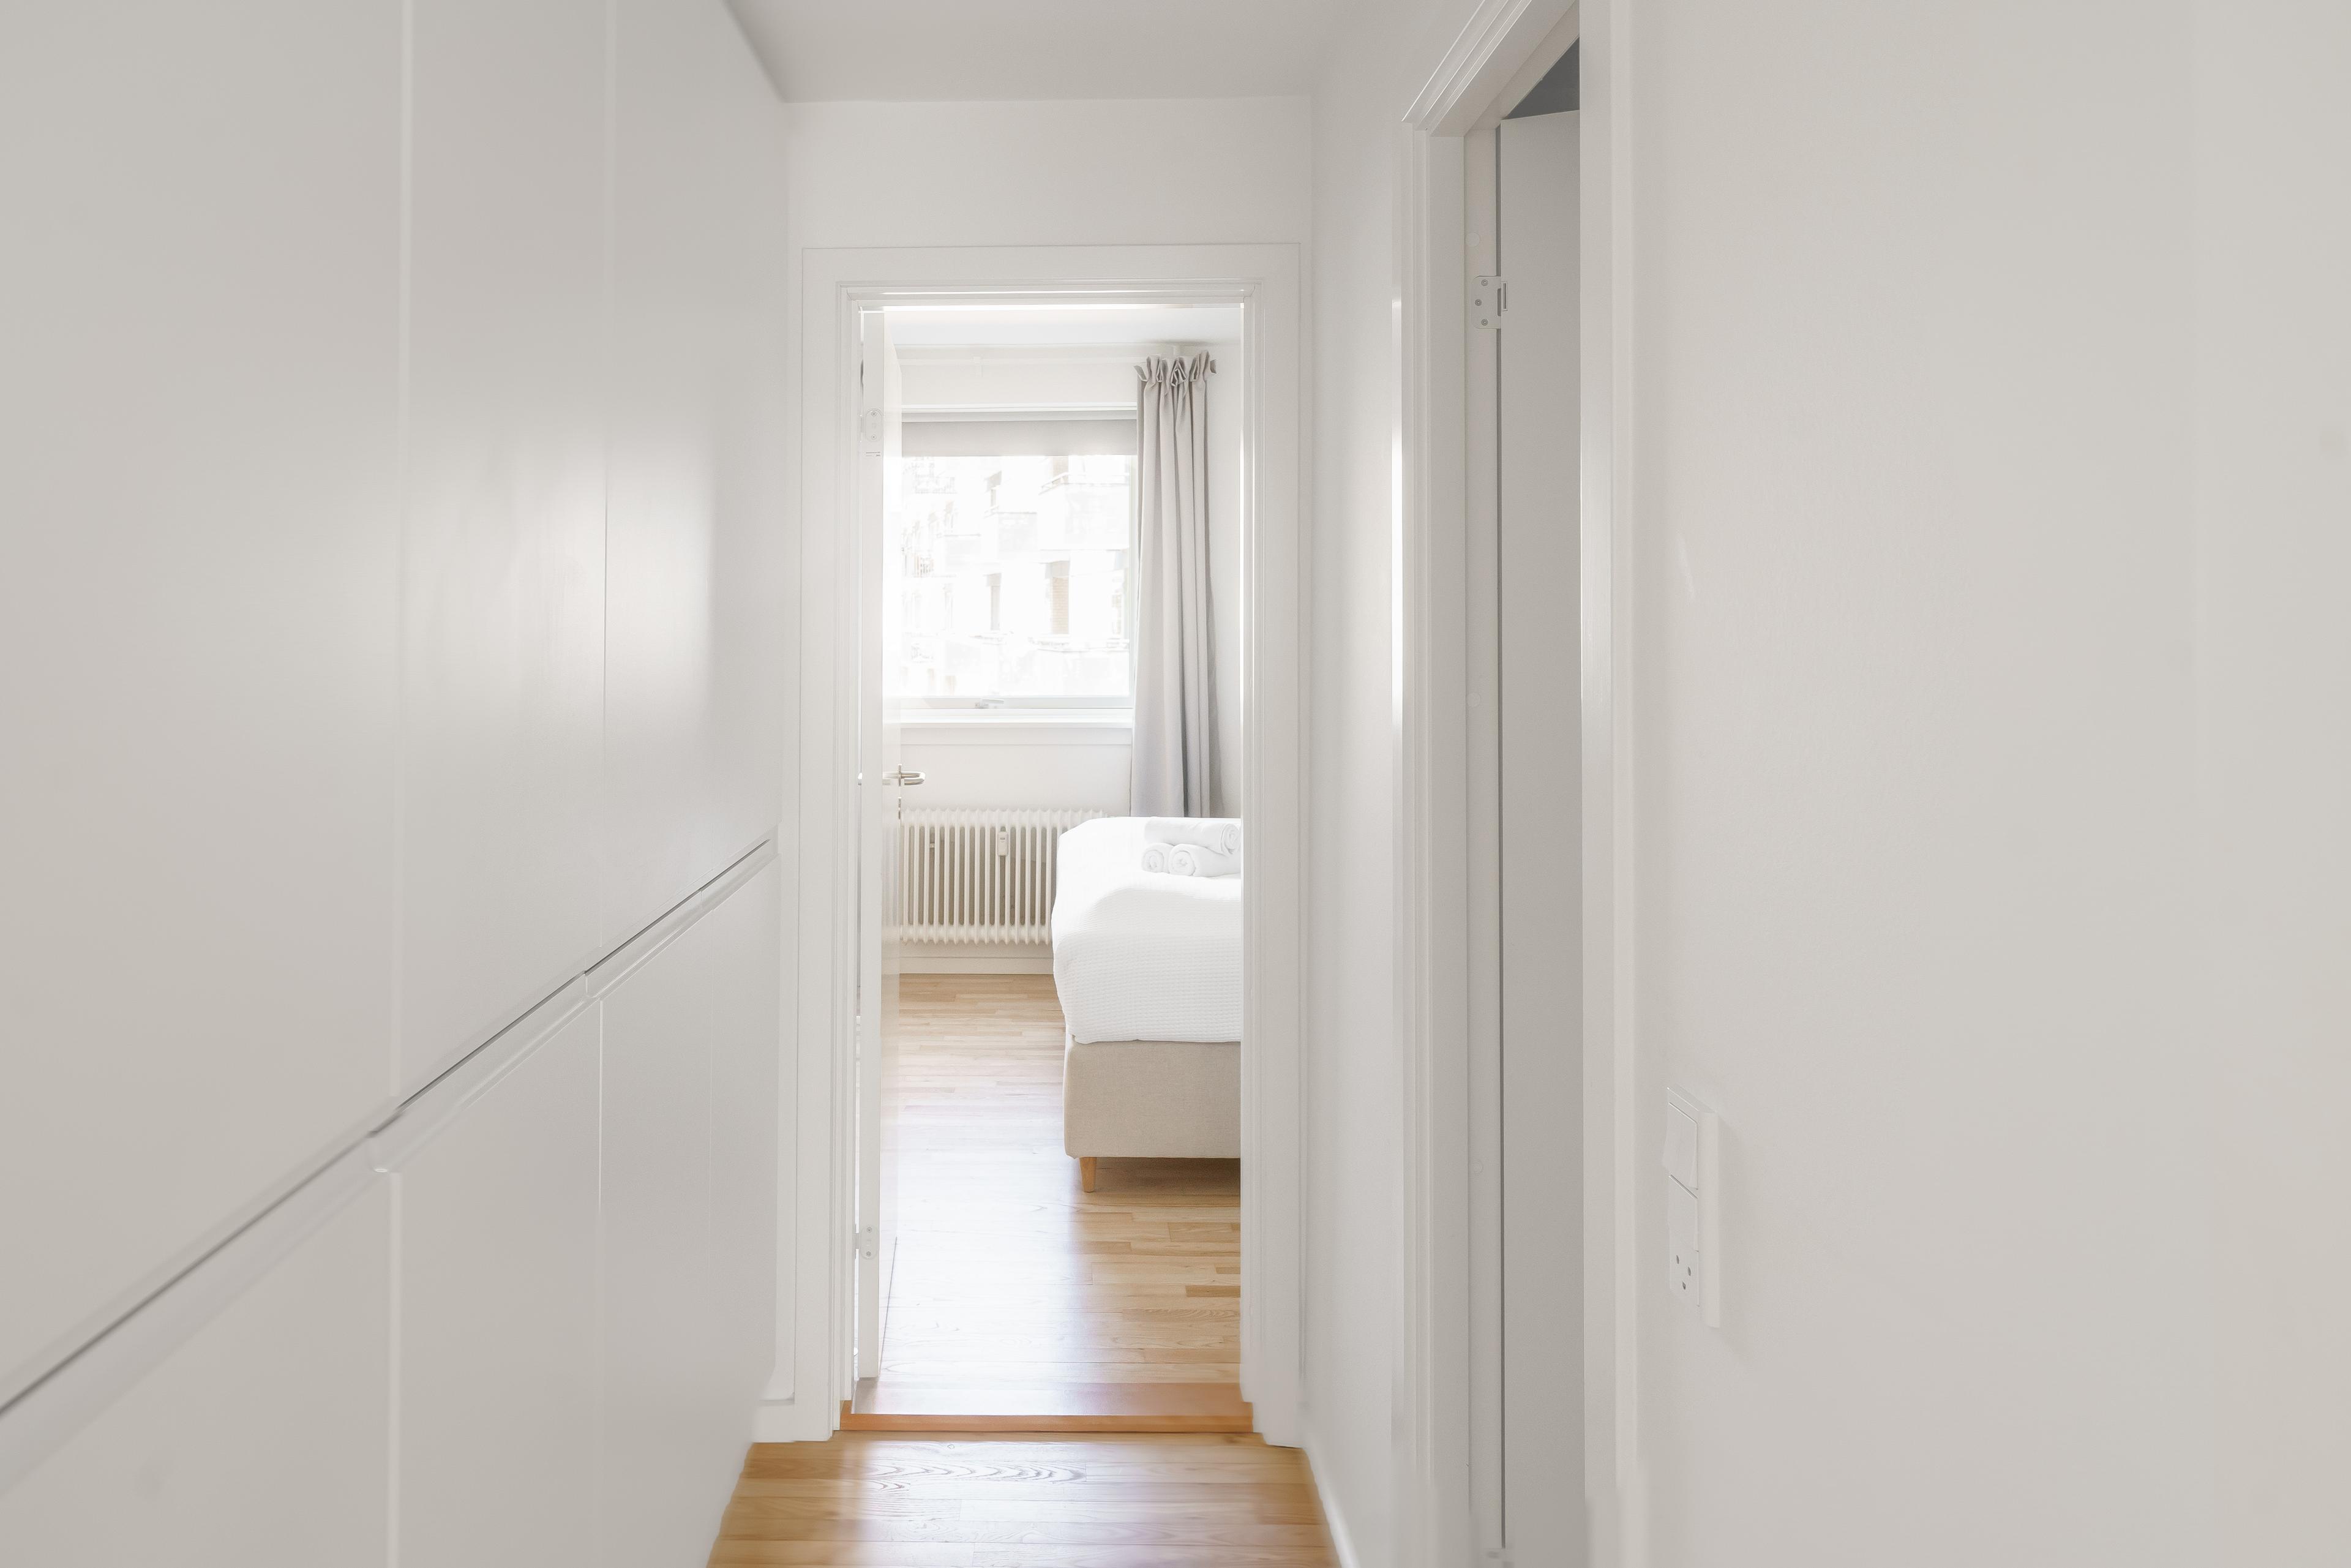 A hallway leading to a bedroom